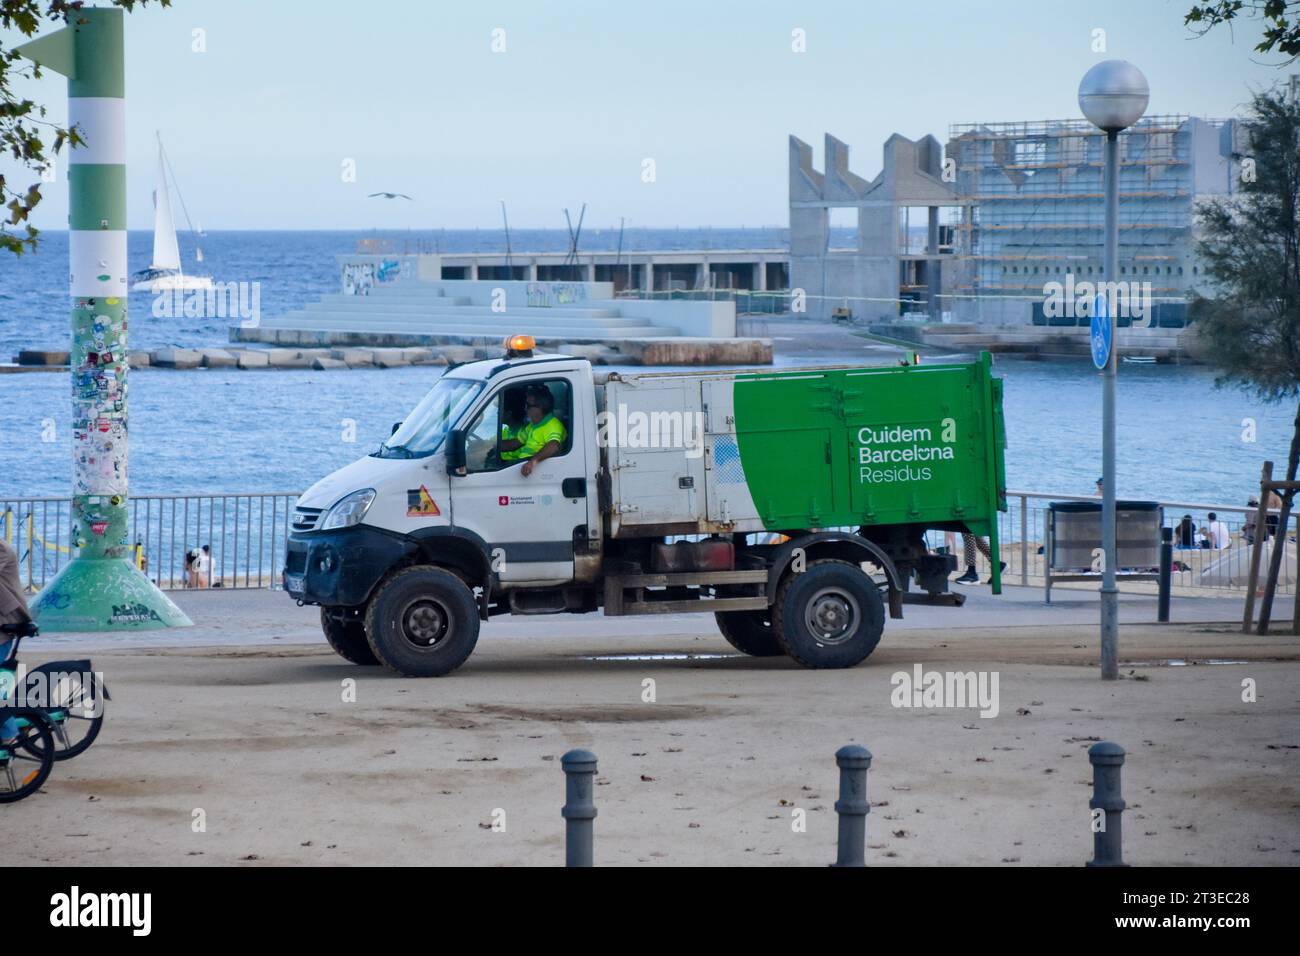 Municipal services, recycling collection. Municipal truck of waste management at beach. Barcelona, Catalonia, Spain. Stock Photo